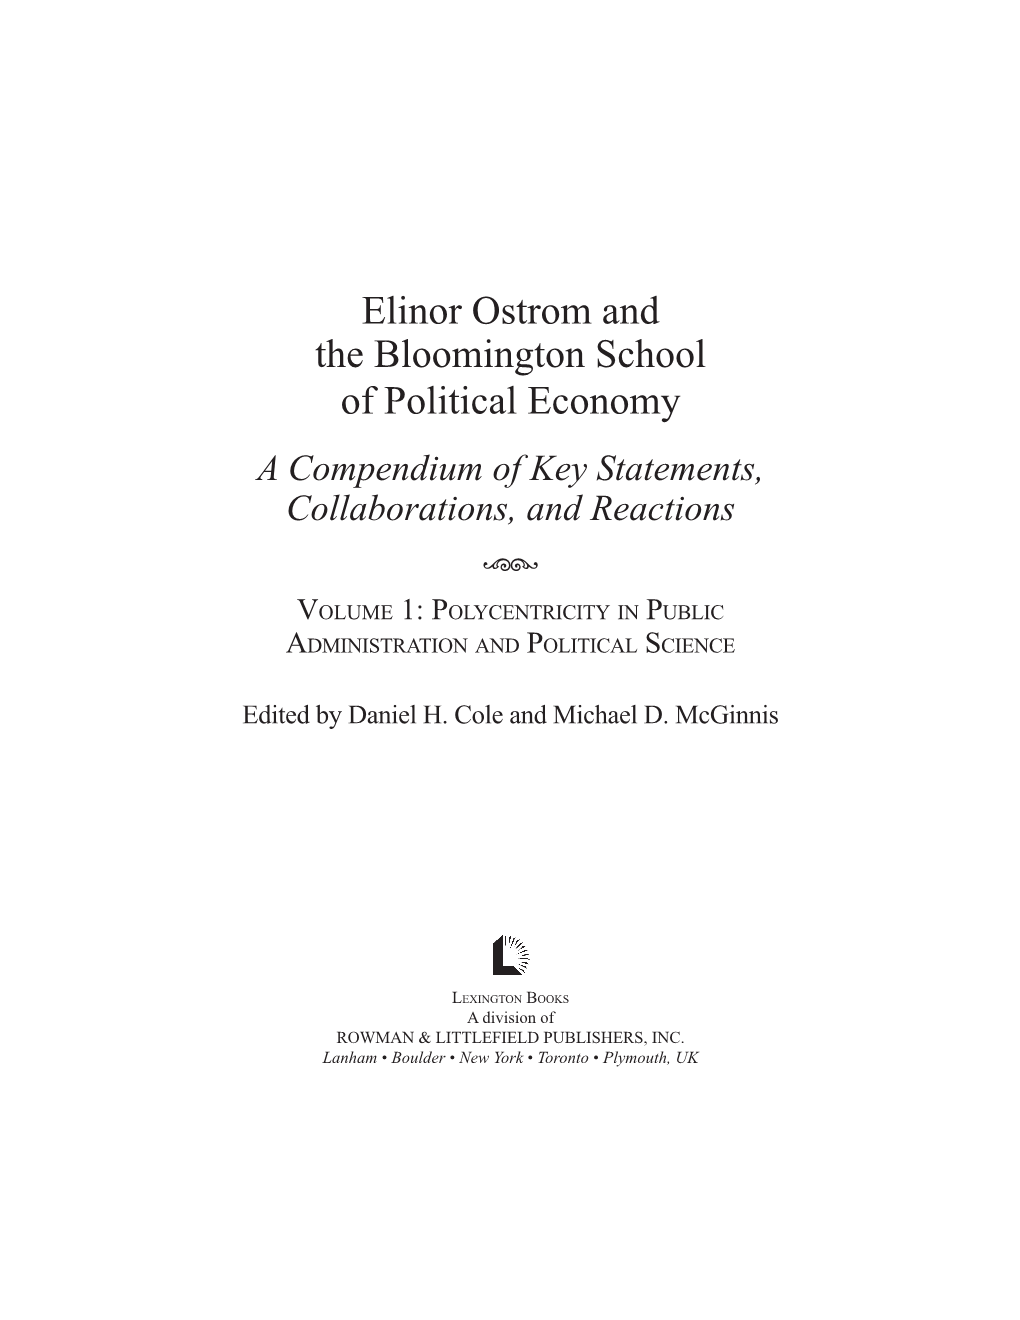 Elinor Ostrom and the Bloomington School of Political Economy a Compendium of Key Statements, Collaborations, and Reactions Ķĸ